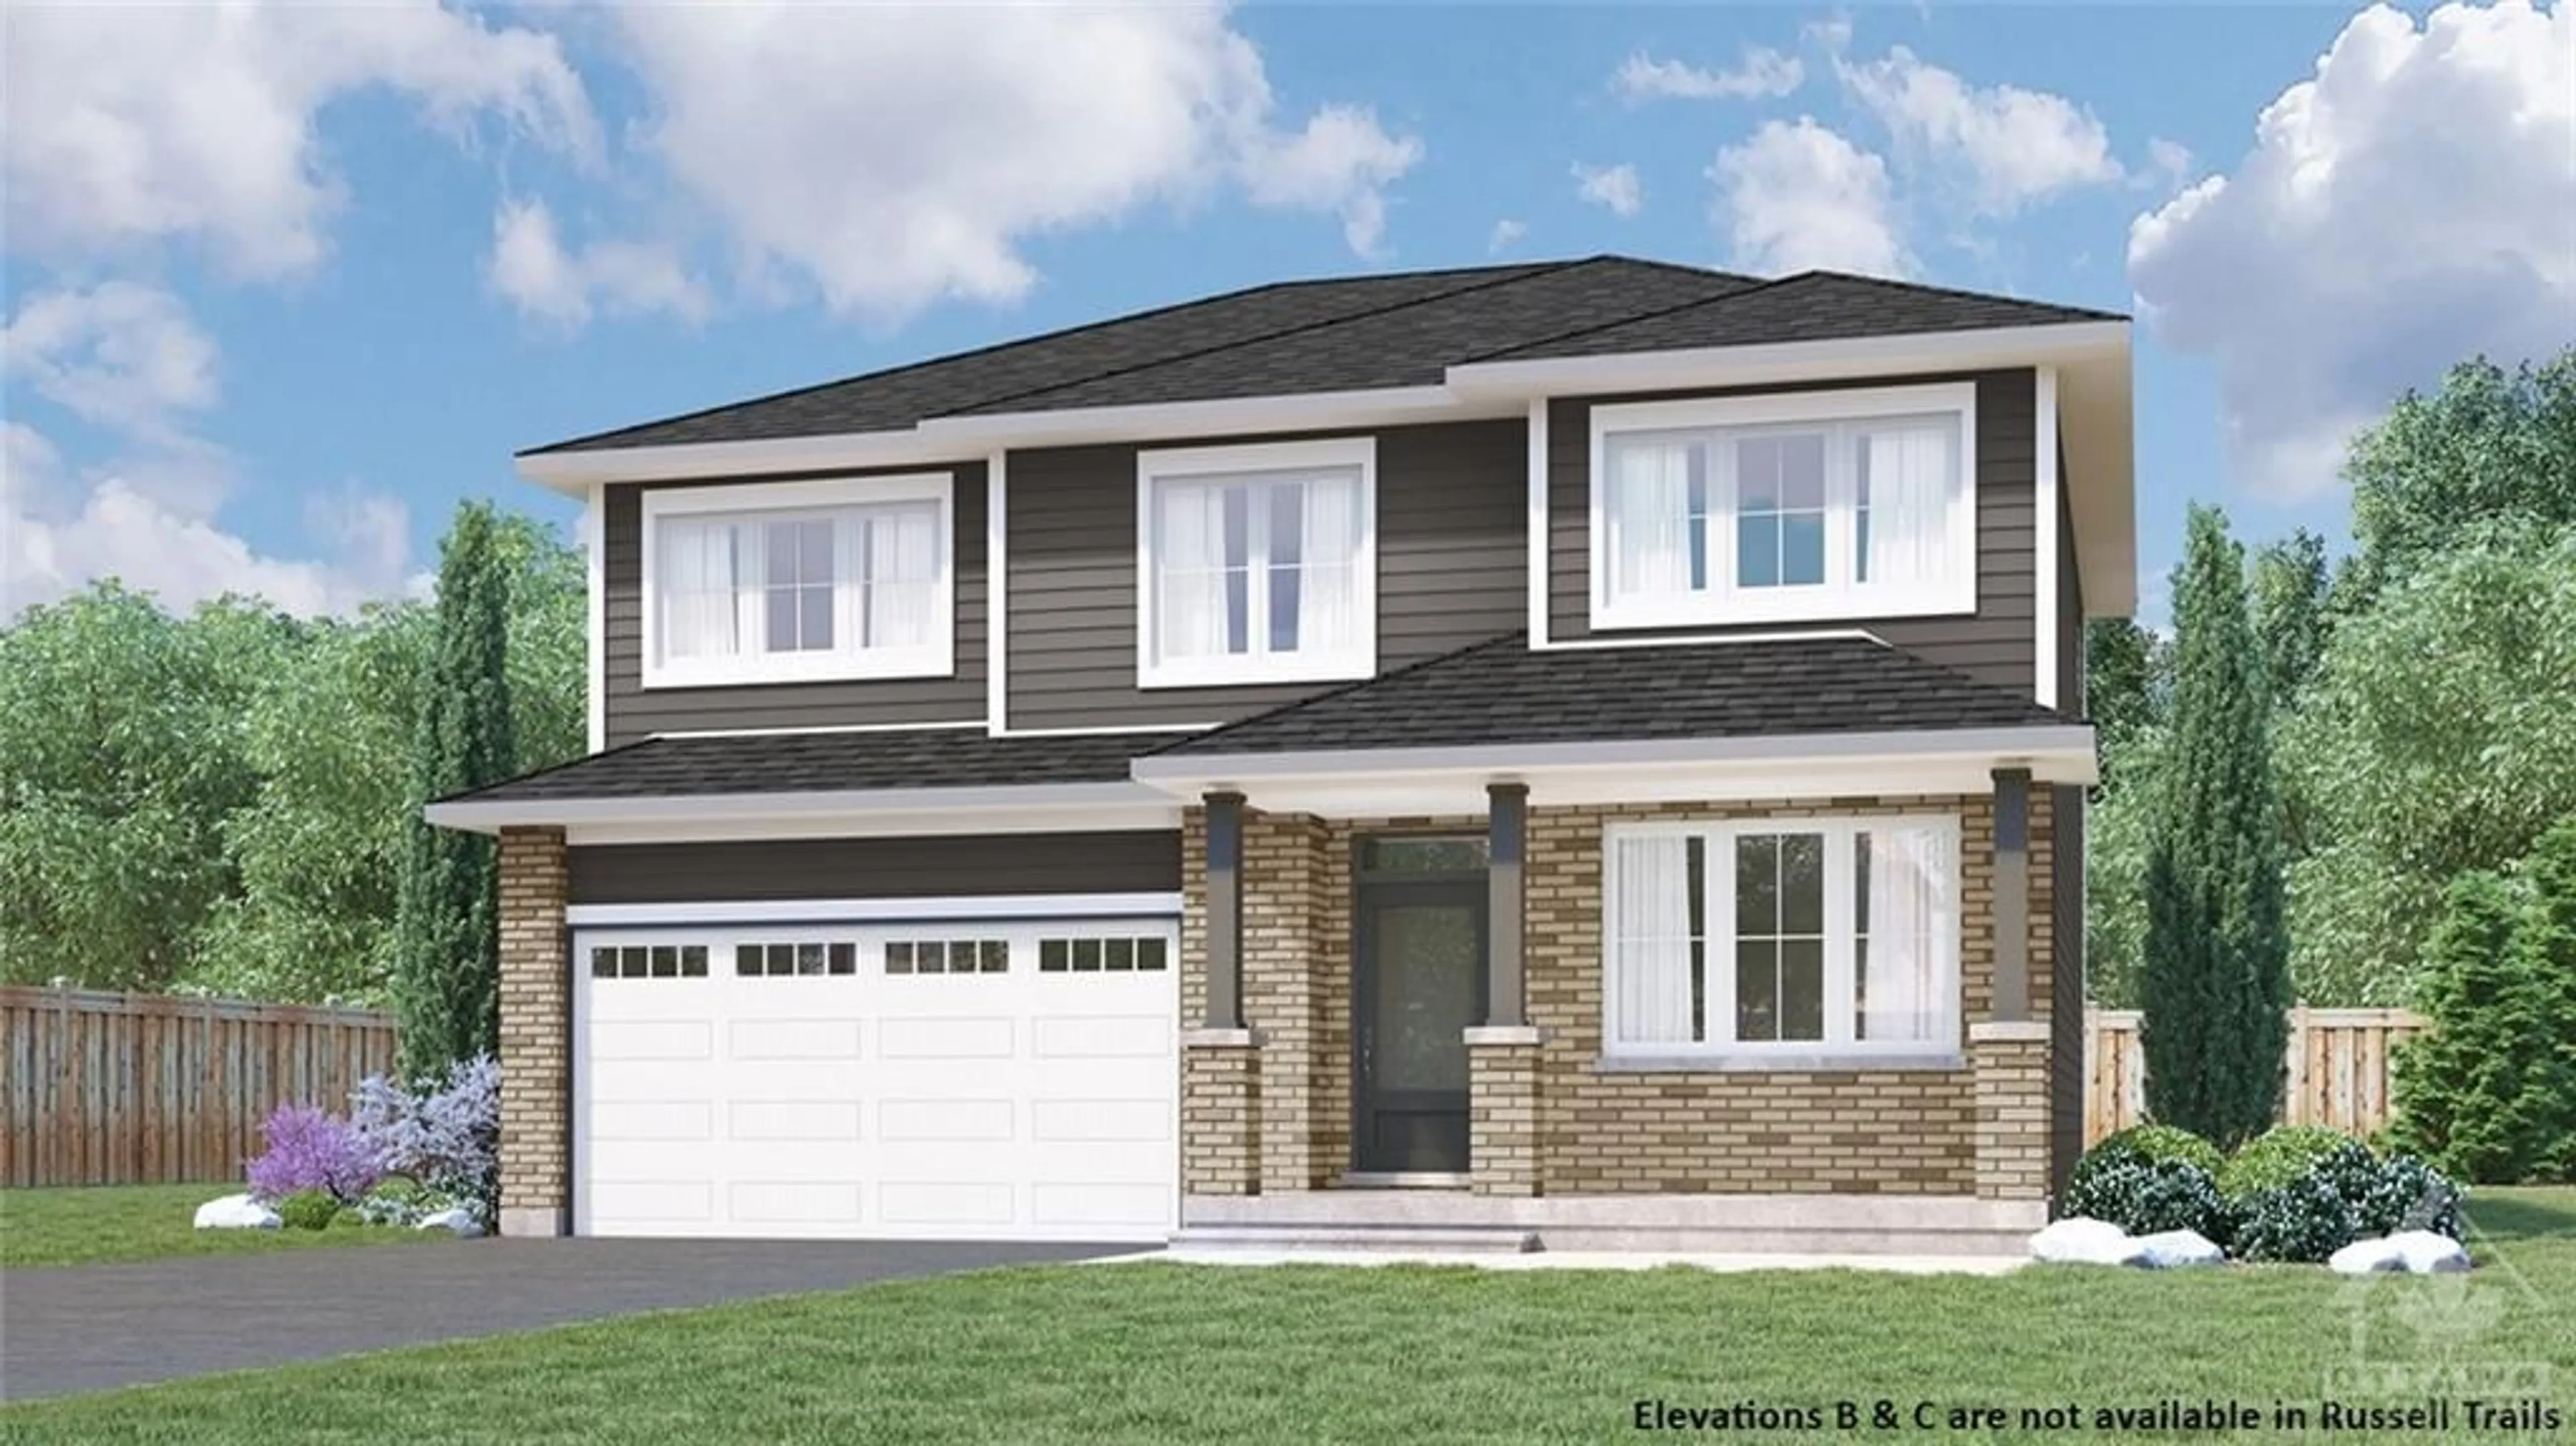 Home with brick exterior material for 825 GAMBLE Dr, Russell Ontario K4R 0G6